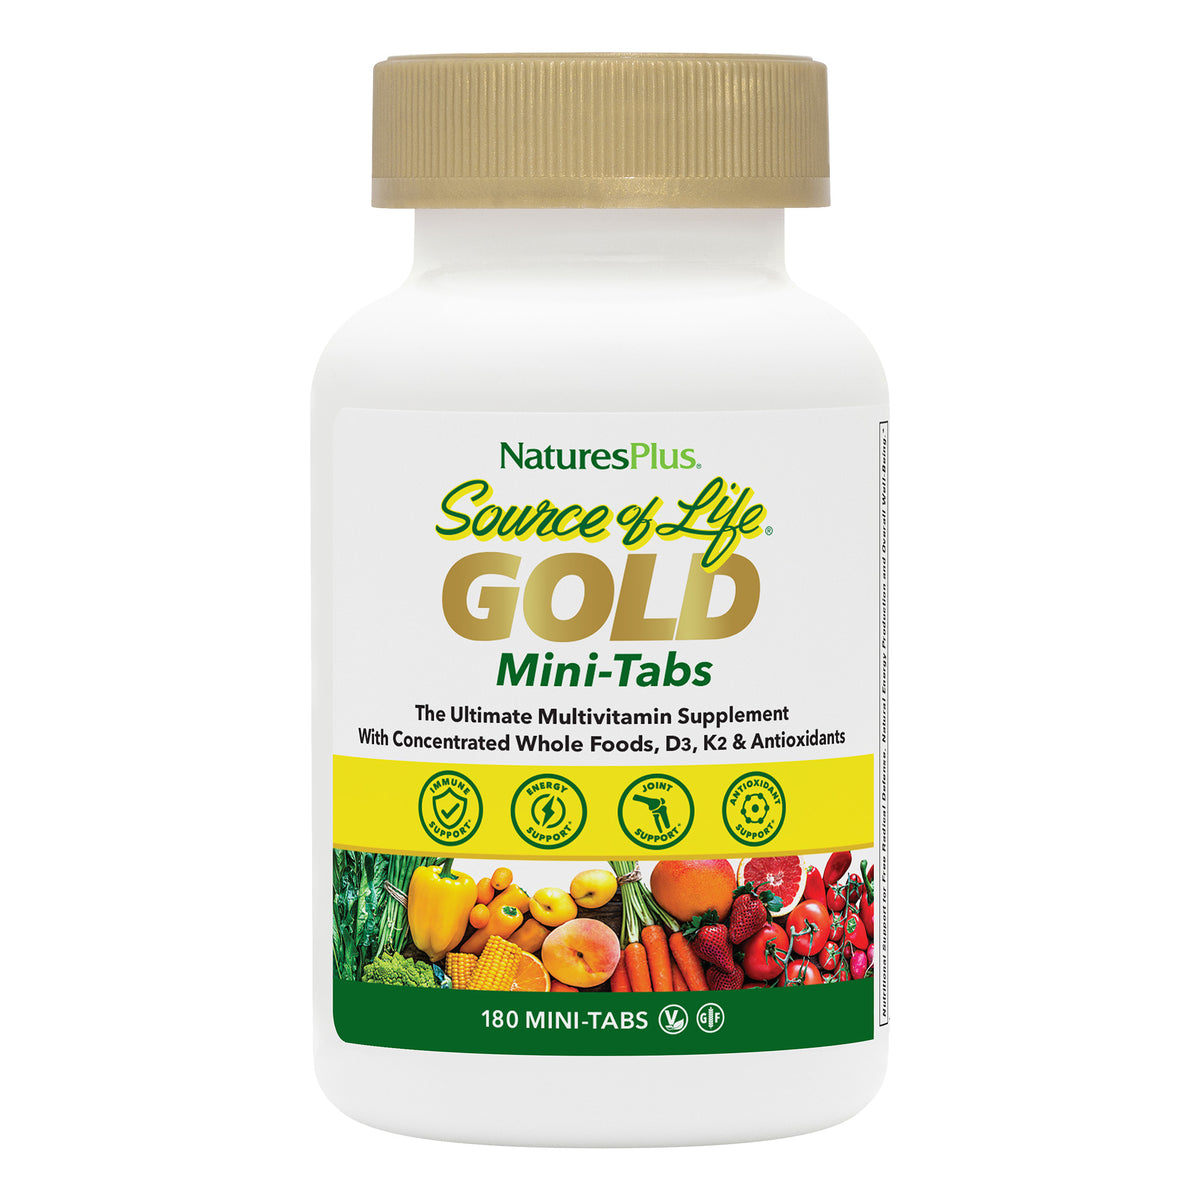 product image of Source of Life® GOLD Multivitamin Mini-Tabs containing 180 Count